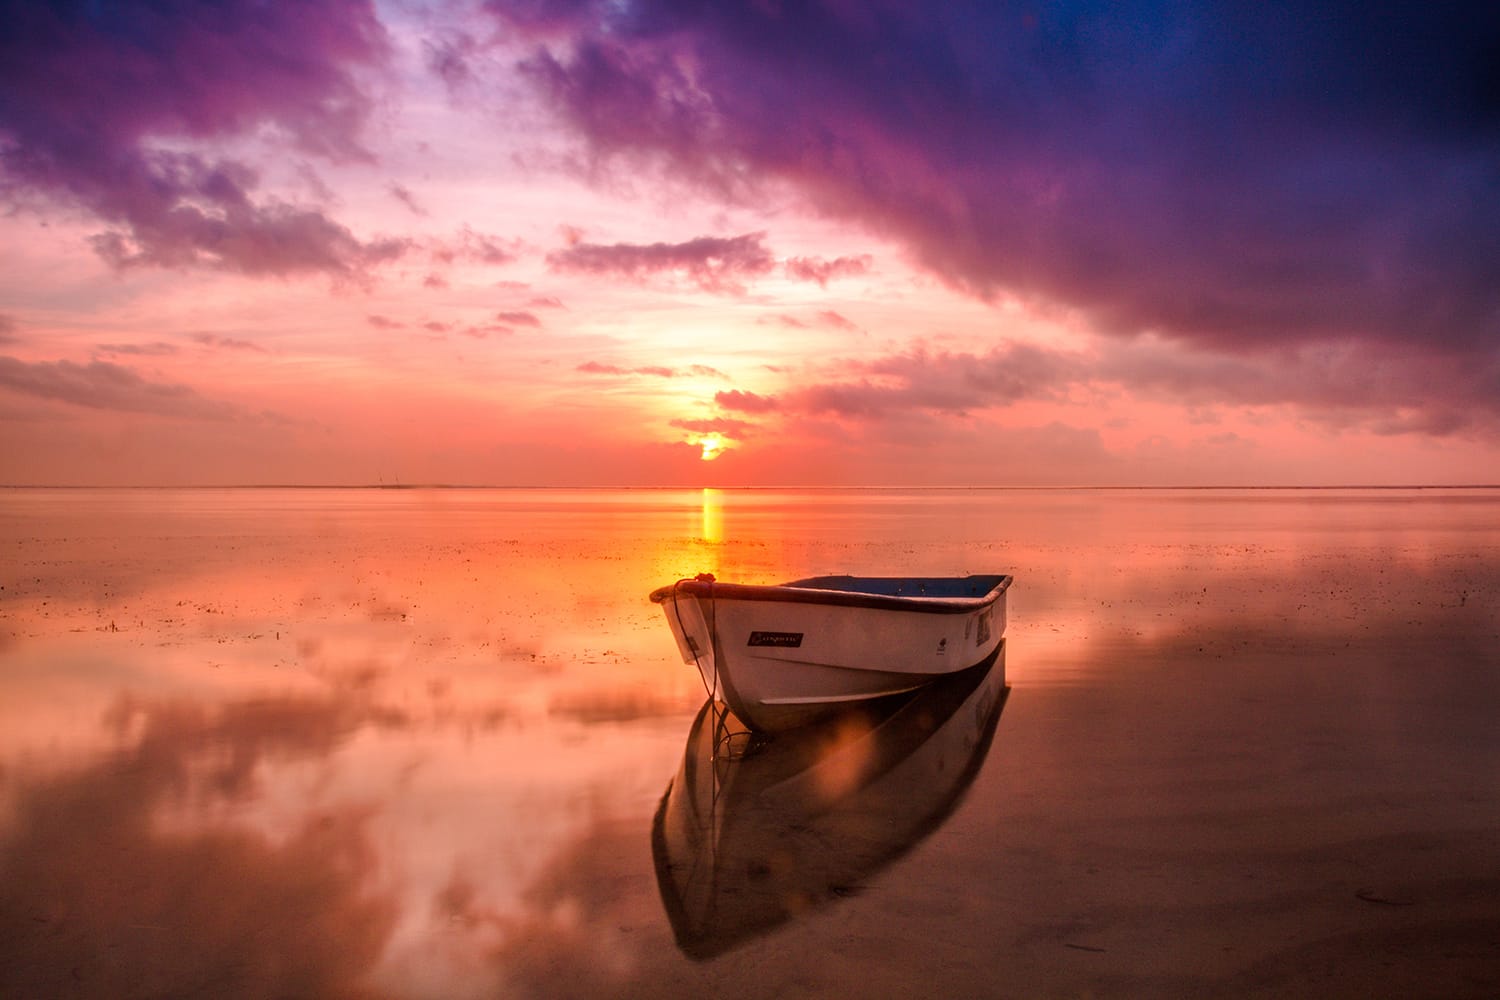 7 Super Useful Tips For Shooting Breathtaking Sunset Photographs You'll Be Proud Of